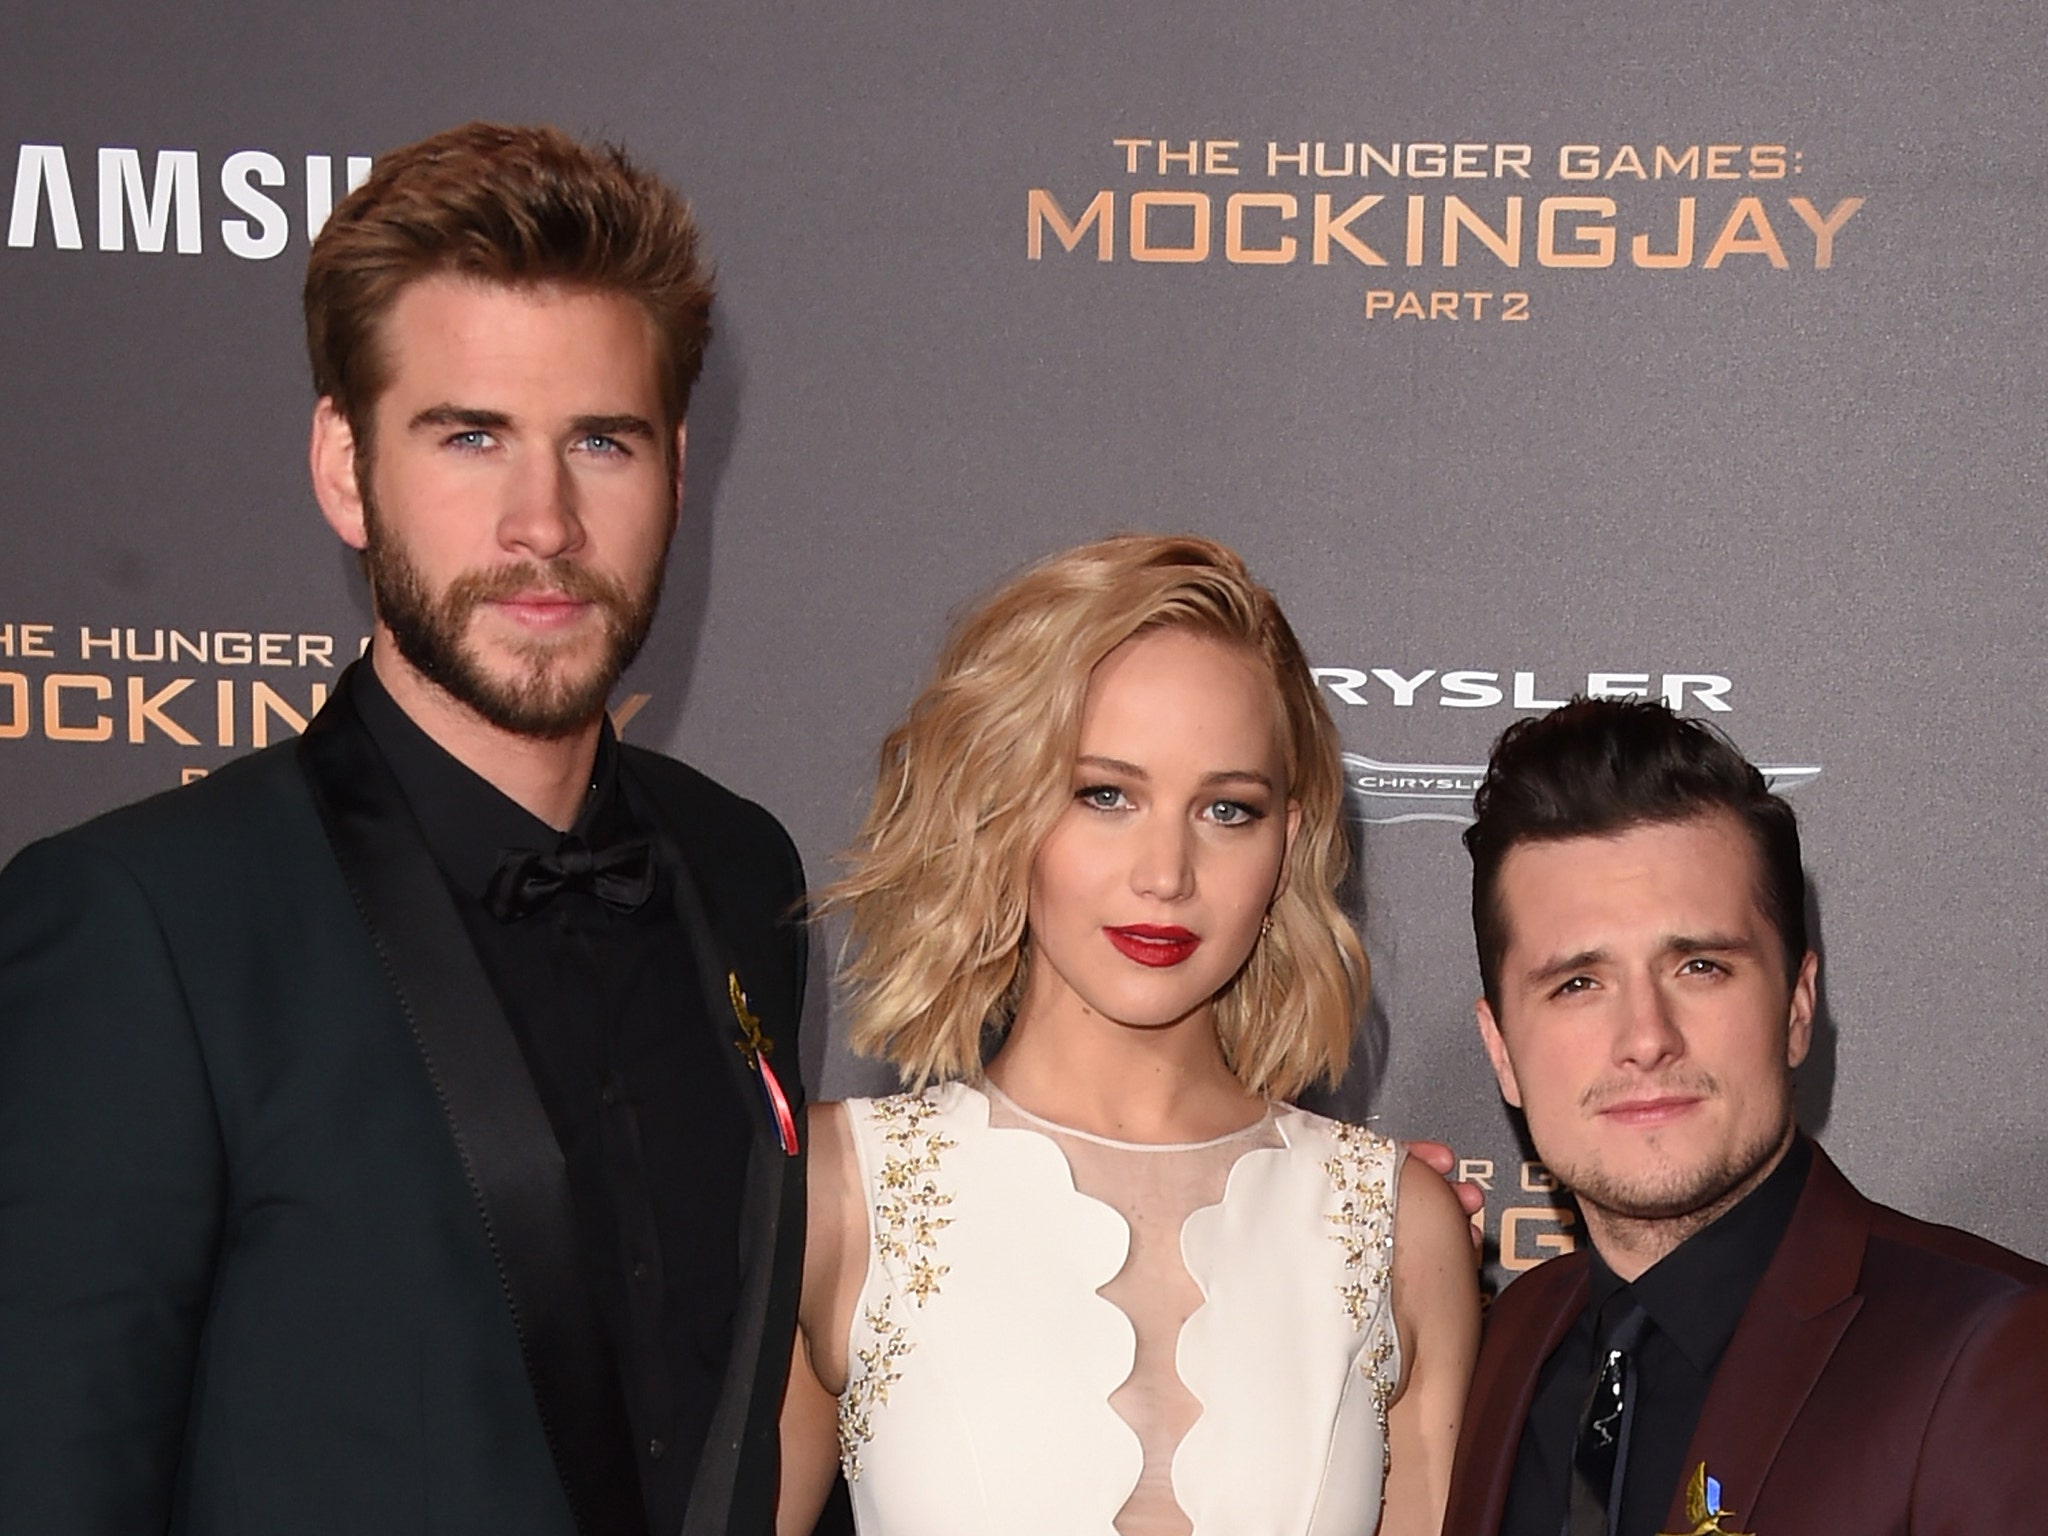 Photos from The Hunger Games: Mockingjay Part 2 Premieres - E